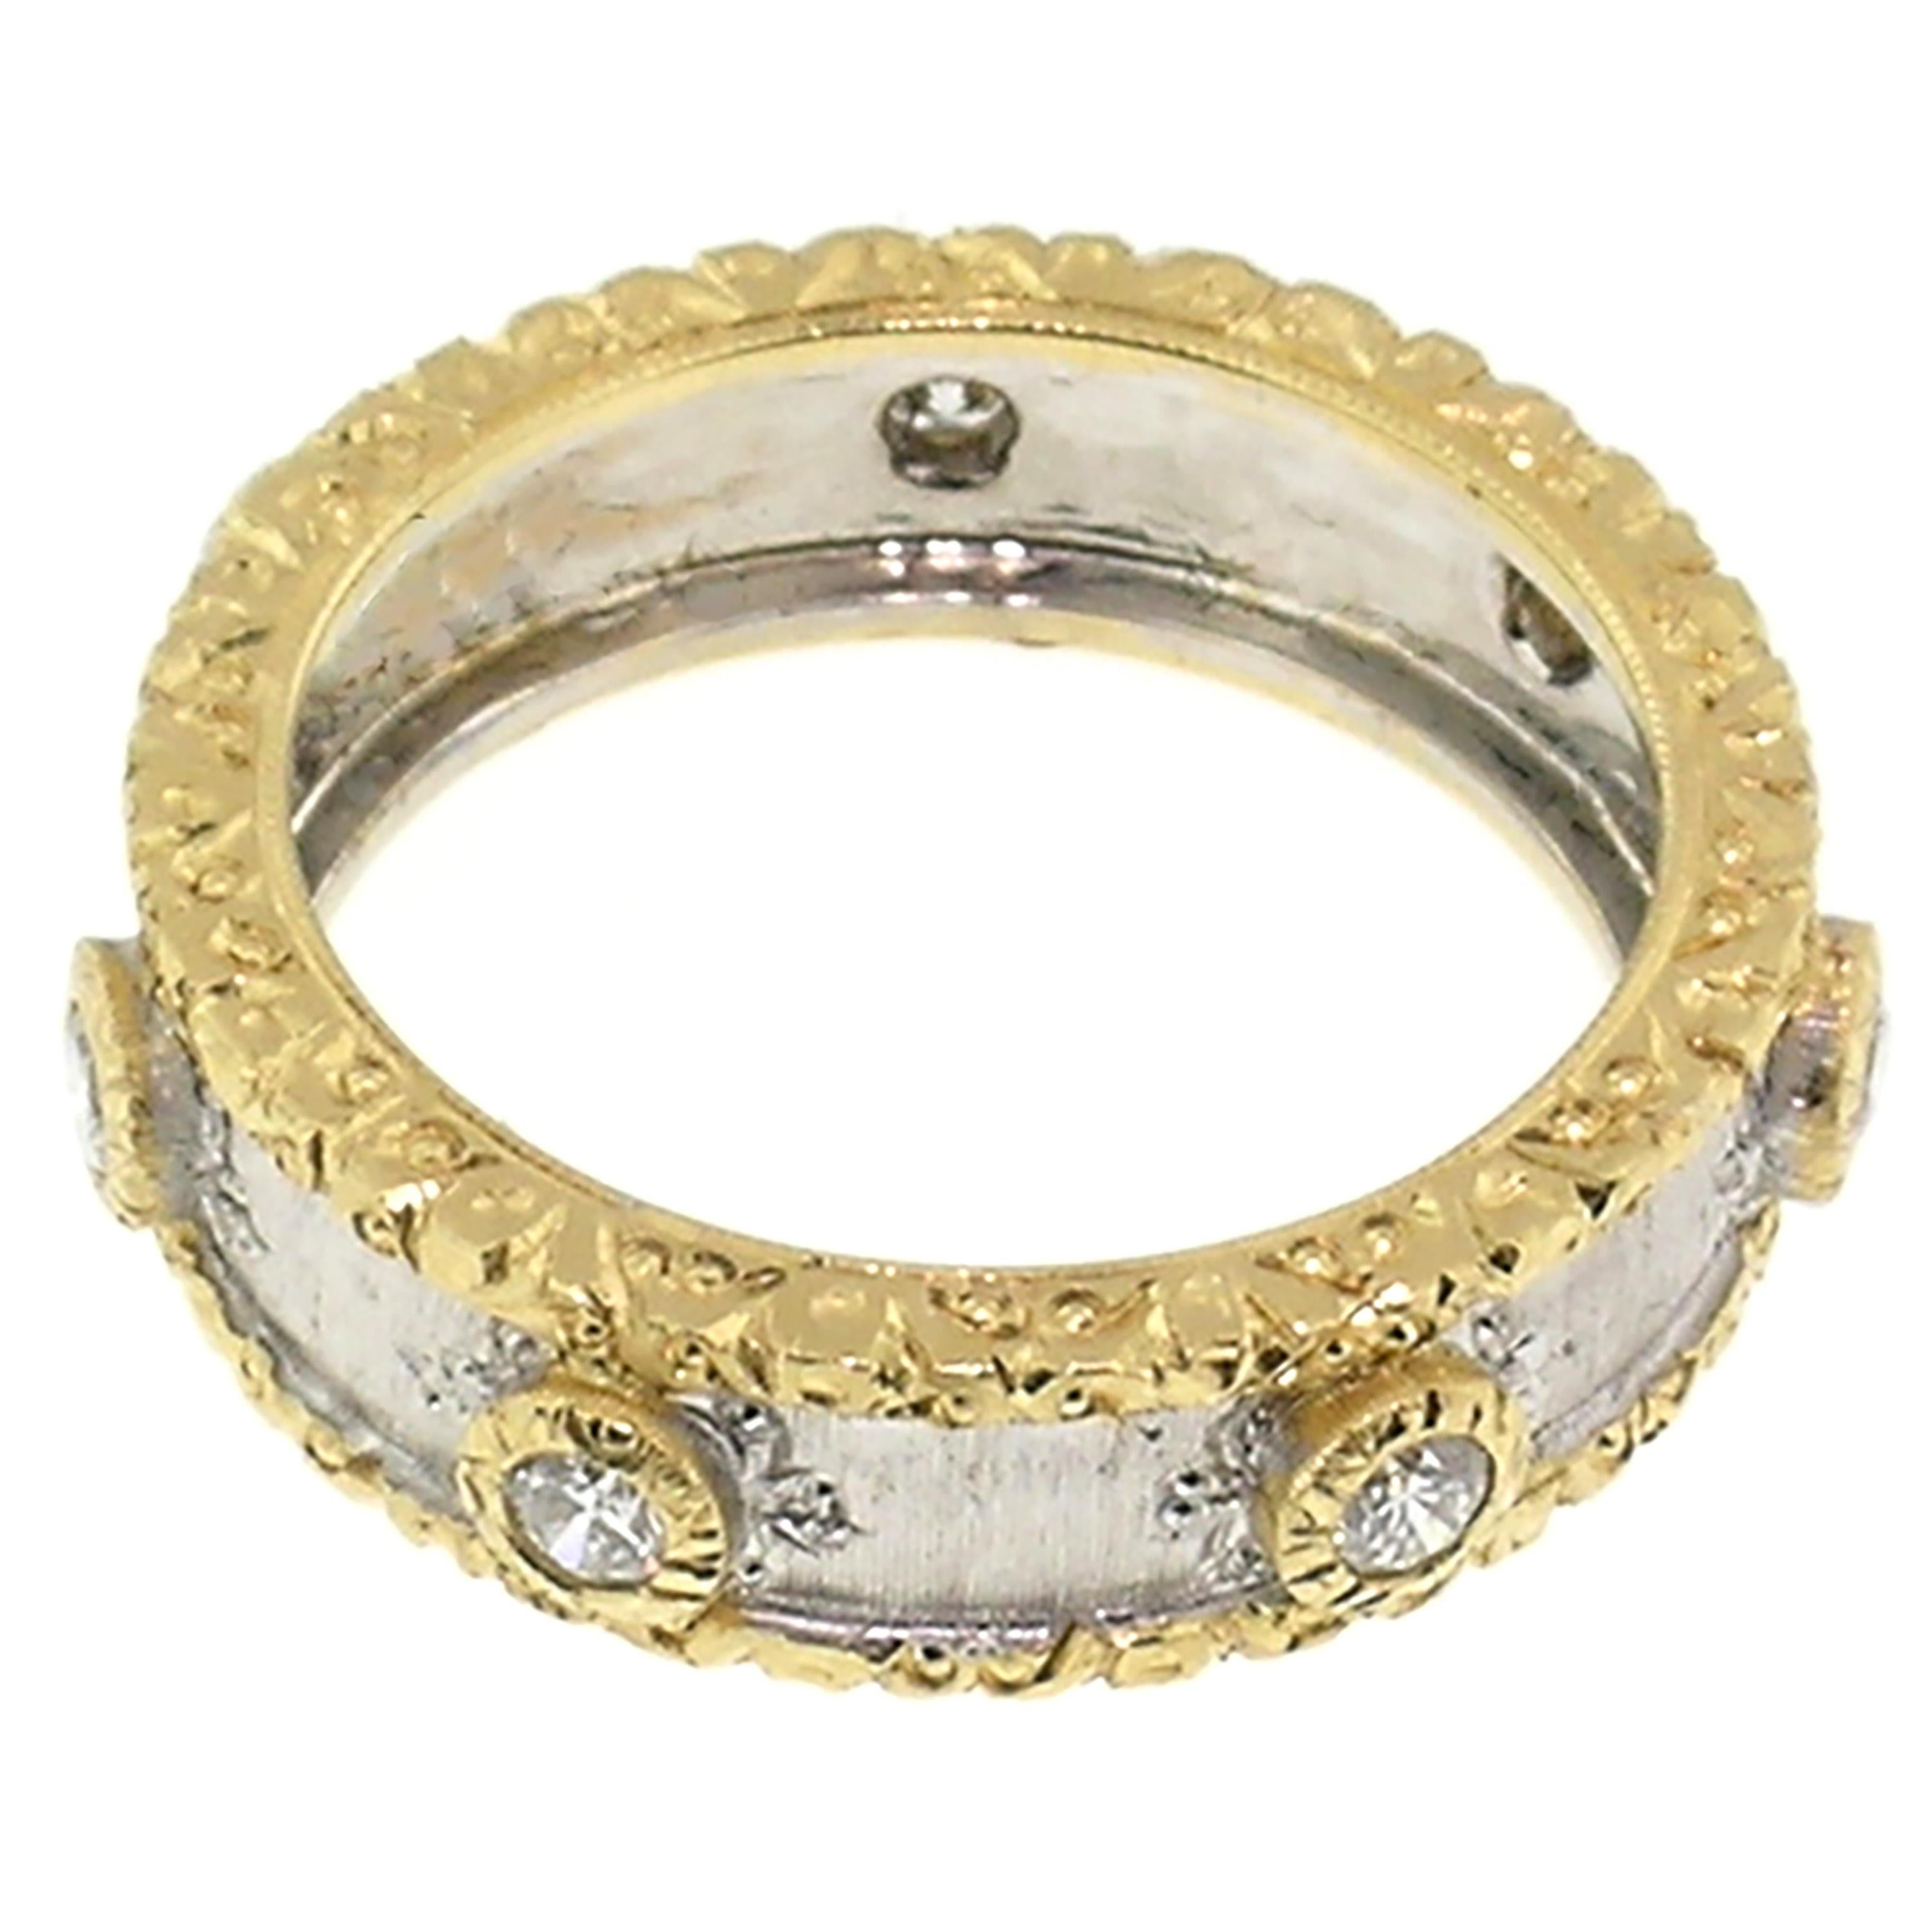 Women's 18 Karat Gold and Diamond Eternity Band, Handmade and Hand-Engraved in Italy